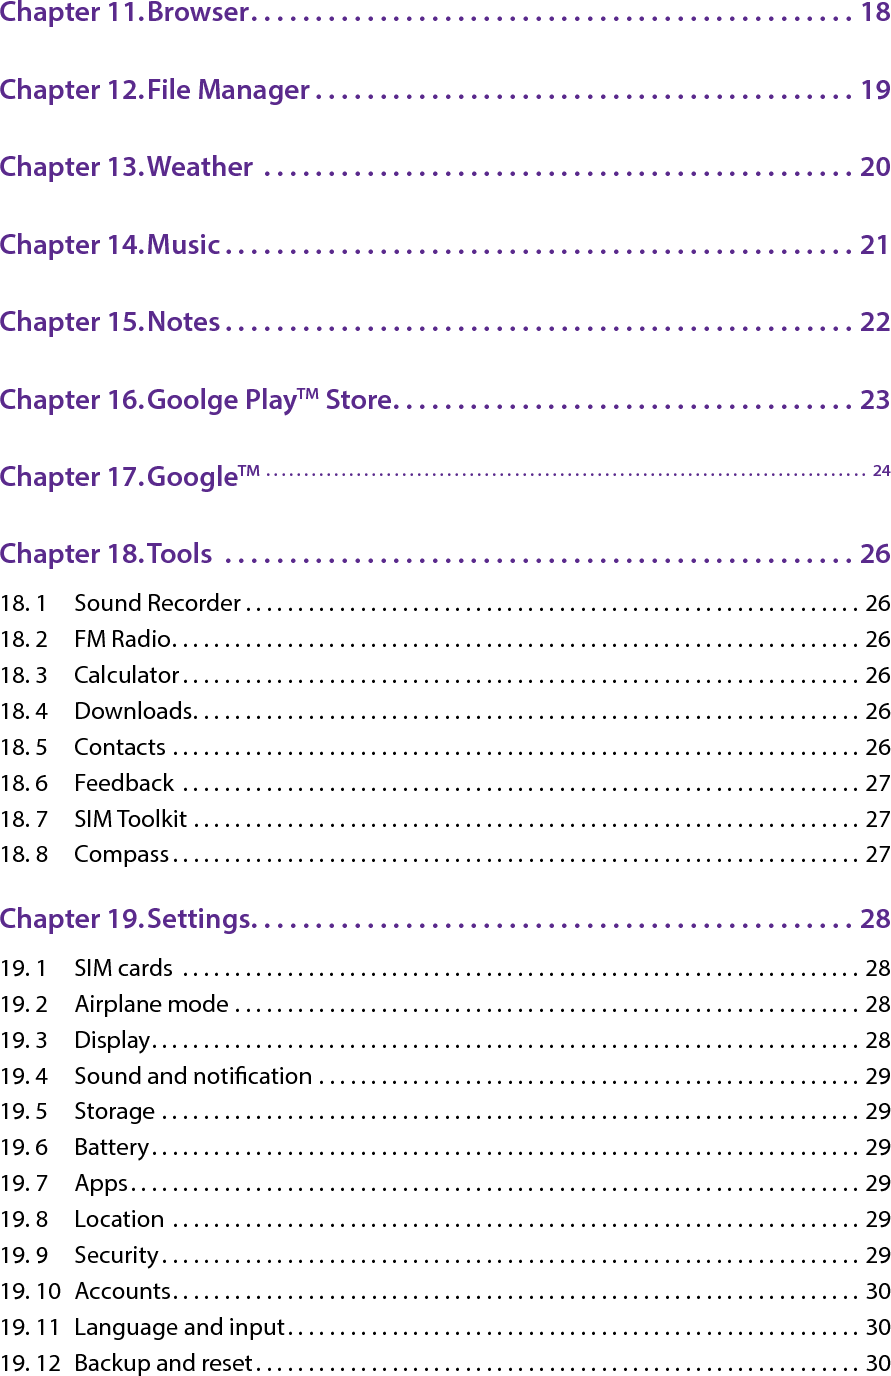 Chapter 11. Browser. . . . . . . . . . . . . . . . . . . . . . . . . . . . . . . . . . . . . . . . . . . . . . . 18Chapter 12. File Manager . . . . . . . . . . . . . . . . . . . . . . . . . . . . . . . . . . . . . . . . . . 19Chapter 13. Weather  . . . . . . . . . . . . . . . . . . . . . . . . . . . . . . . . . . . . . . . . . . . . . . 20Chapter 14. Music . . . . . . . . . . . . . . . . . . . . . . . . . . . . . . . . . . . . . . . . . . . . . . . . . 21Chapter 15. Notes . . . . . . . . . . . . . . . . . . . . . . . . . . . . . . . . . . . . . . . . . . . . . . . . . 22Chapter 16. Goolge PlayTM Store. . . . . . . . . . . . . . . . . . . . . . . . . . . . . . . . . . . . 23Chapter 17. GoogleTM  . . . . . . . . . . . . . . . . . . . . . . . . . . . . . . . . . . . . . . . . . . . . . . . . . . . . . . . . . . . . . . . . . . . . . . . . . . . . . . . .  24Chapter 18. Tools  . . . . . . . . . . . . . . . . . . . . . . . . . . . . . . . . . . . . . . . . . . . . . . . . . 2618. 1  Sound Recorder . . . . . . . . . . . . . . . . . . . . . . . . . . . . . . . . . . . . . . . . . . . . . . . . . . . . . . . . . . . 2618. 2  FM Radio. . . . . . . . . . . . . . . . . . . . . . . . . . . . . . . . . . . . . . . . . . . . . . . . . . . . . . . . . . . . . . . . . . 2618. 3  Calculator. . . . . . . . . . . . . . . . . . . . . . . . . . . . . . . . . . . . . . . . . . . . . . . . . . . . . . . . . . . . . . . . . 2618. 4  Downloads. . . . . . . . . . . . . . . . . . . . . . . . . . . . . . . . . . . . . . . . . . . . . . . . . . . . . . . . . . . . . . . . 2618. 5  Contacts  . . . . . . . . . . . . . . . . . . . . . . . . . . . . . . . . . . . . . . . . . . . . . . . . . . . . . . . . . . . . . . . . . . 2618. 6  Feedback  . . . . . . . . . . . . . . . . . . . . . . . . . . . . . . . . . . . . . . . . . . . . . . . . . . . . . . . . . . . . . . . . . 2718. 7  SIM Toolkit  . . . . . . . . . . . . . . . . . . . . . . . . . . . . . . . . . . . . . . . . . . . . . . . . . . . . . . . . . . . . . . . . 2718. 8  Compass. . . . . . . . . . . . . . . . . . . . . . . . . . . . . . . . . . . . . . . . . . . . . . . . . . . . . . . . . . . . . . . . . . 27Chapter 19. Settings. . . . . . . . . . . . . . . . . . . . . . . . . . . . . . . . . . . . . . . . . . . . . . . 2819. 1  SIM cards  . . . . . . . . . . . . . . . . . . . . . . . . . . . . . . . . . . . . . . . . . . . . . . . . . . . . . . . . . . . . . . . . . 2819. 2  Airplane mode  . . . . . . . . . . . . . . . . . . . . . . . . . . . . . . . . . . . . . . . . . . . . . . . . . . . . . . . . . . . . 2819. 3  Display. . . . . . . . . . . . . . . . . . . . . . . . . . . . . . . . . . . . . . . . . . . . . . . . . . . . . . . . . . . . . . . . . . . . 2819. 4  Sound and notication  . . . . . . . . . . . . . . . . . . . . . . . . . . . . . . . . . . . . . . . . . . . . . . . . . . . . 2919. 5  Storage  . . . . . . . . . . . . . . . . . . . . . . . . . . . . . . . . . . . . . . . . . . . . . . . . . . . . . . . . . . . . . . . . . . . 2919. 6  Battery. . . . . . . . . . . . . . . . . . . . . . . . . . . . . . . . . . . . . . . . . . . . . . . . . . . . . . . . . . . . . . . . . . . . 2919. 7  Apps. . . . . . . . . . . . . . . . . . . . . . . . . . . . . . . . . . . . . . . . . . . . . . . . . . . . . . . . . . . . . . . . . . . . . . 2919. 8  Location  . . . . . . . . . . . . . . . . . . . . . . . . . . . . . . . . . . . . . . . . . . . . . . . . . . . . . . . . . . . . . . . . . . 2919. 9  Security . . . . . . . . . . . . . . . . . . . . . . . . . . . . . . . . . . . . . . . . . . . . . . . . . . . . . . . . . . . . . . . . . . . 2919. 10  Accounts. . . . . . . . . . . . . . . . . . . . . . . . . . . . . . . . . . . . . . . . . . . . . . . . . . . . . . . . . . . . . . . . . . 3019. 11  Language and input. . . . . . . . . . . . . . . . . . . . . . . . . . . . . . . . . . . . . . . . . . . . . . . . . . . . . . . 3019. 12  Backup and reset. . . . . . . . . . . . . . . . . . . . . . . . . . . . . . . . . . . . . . . . . . . . . . . . . . . . . . . . . . 30